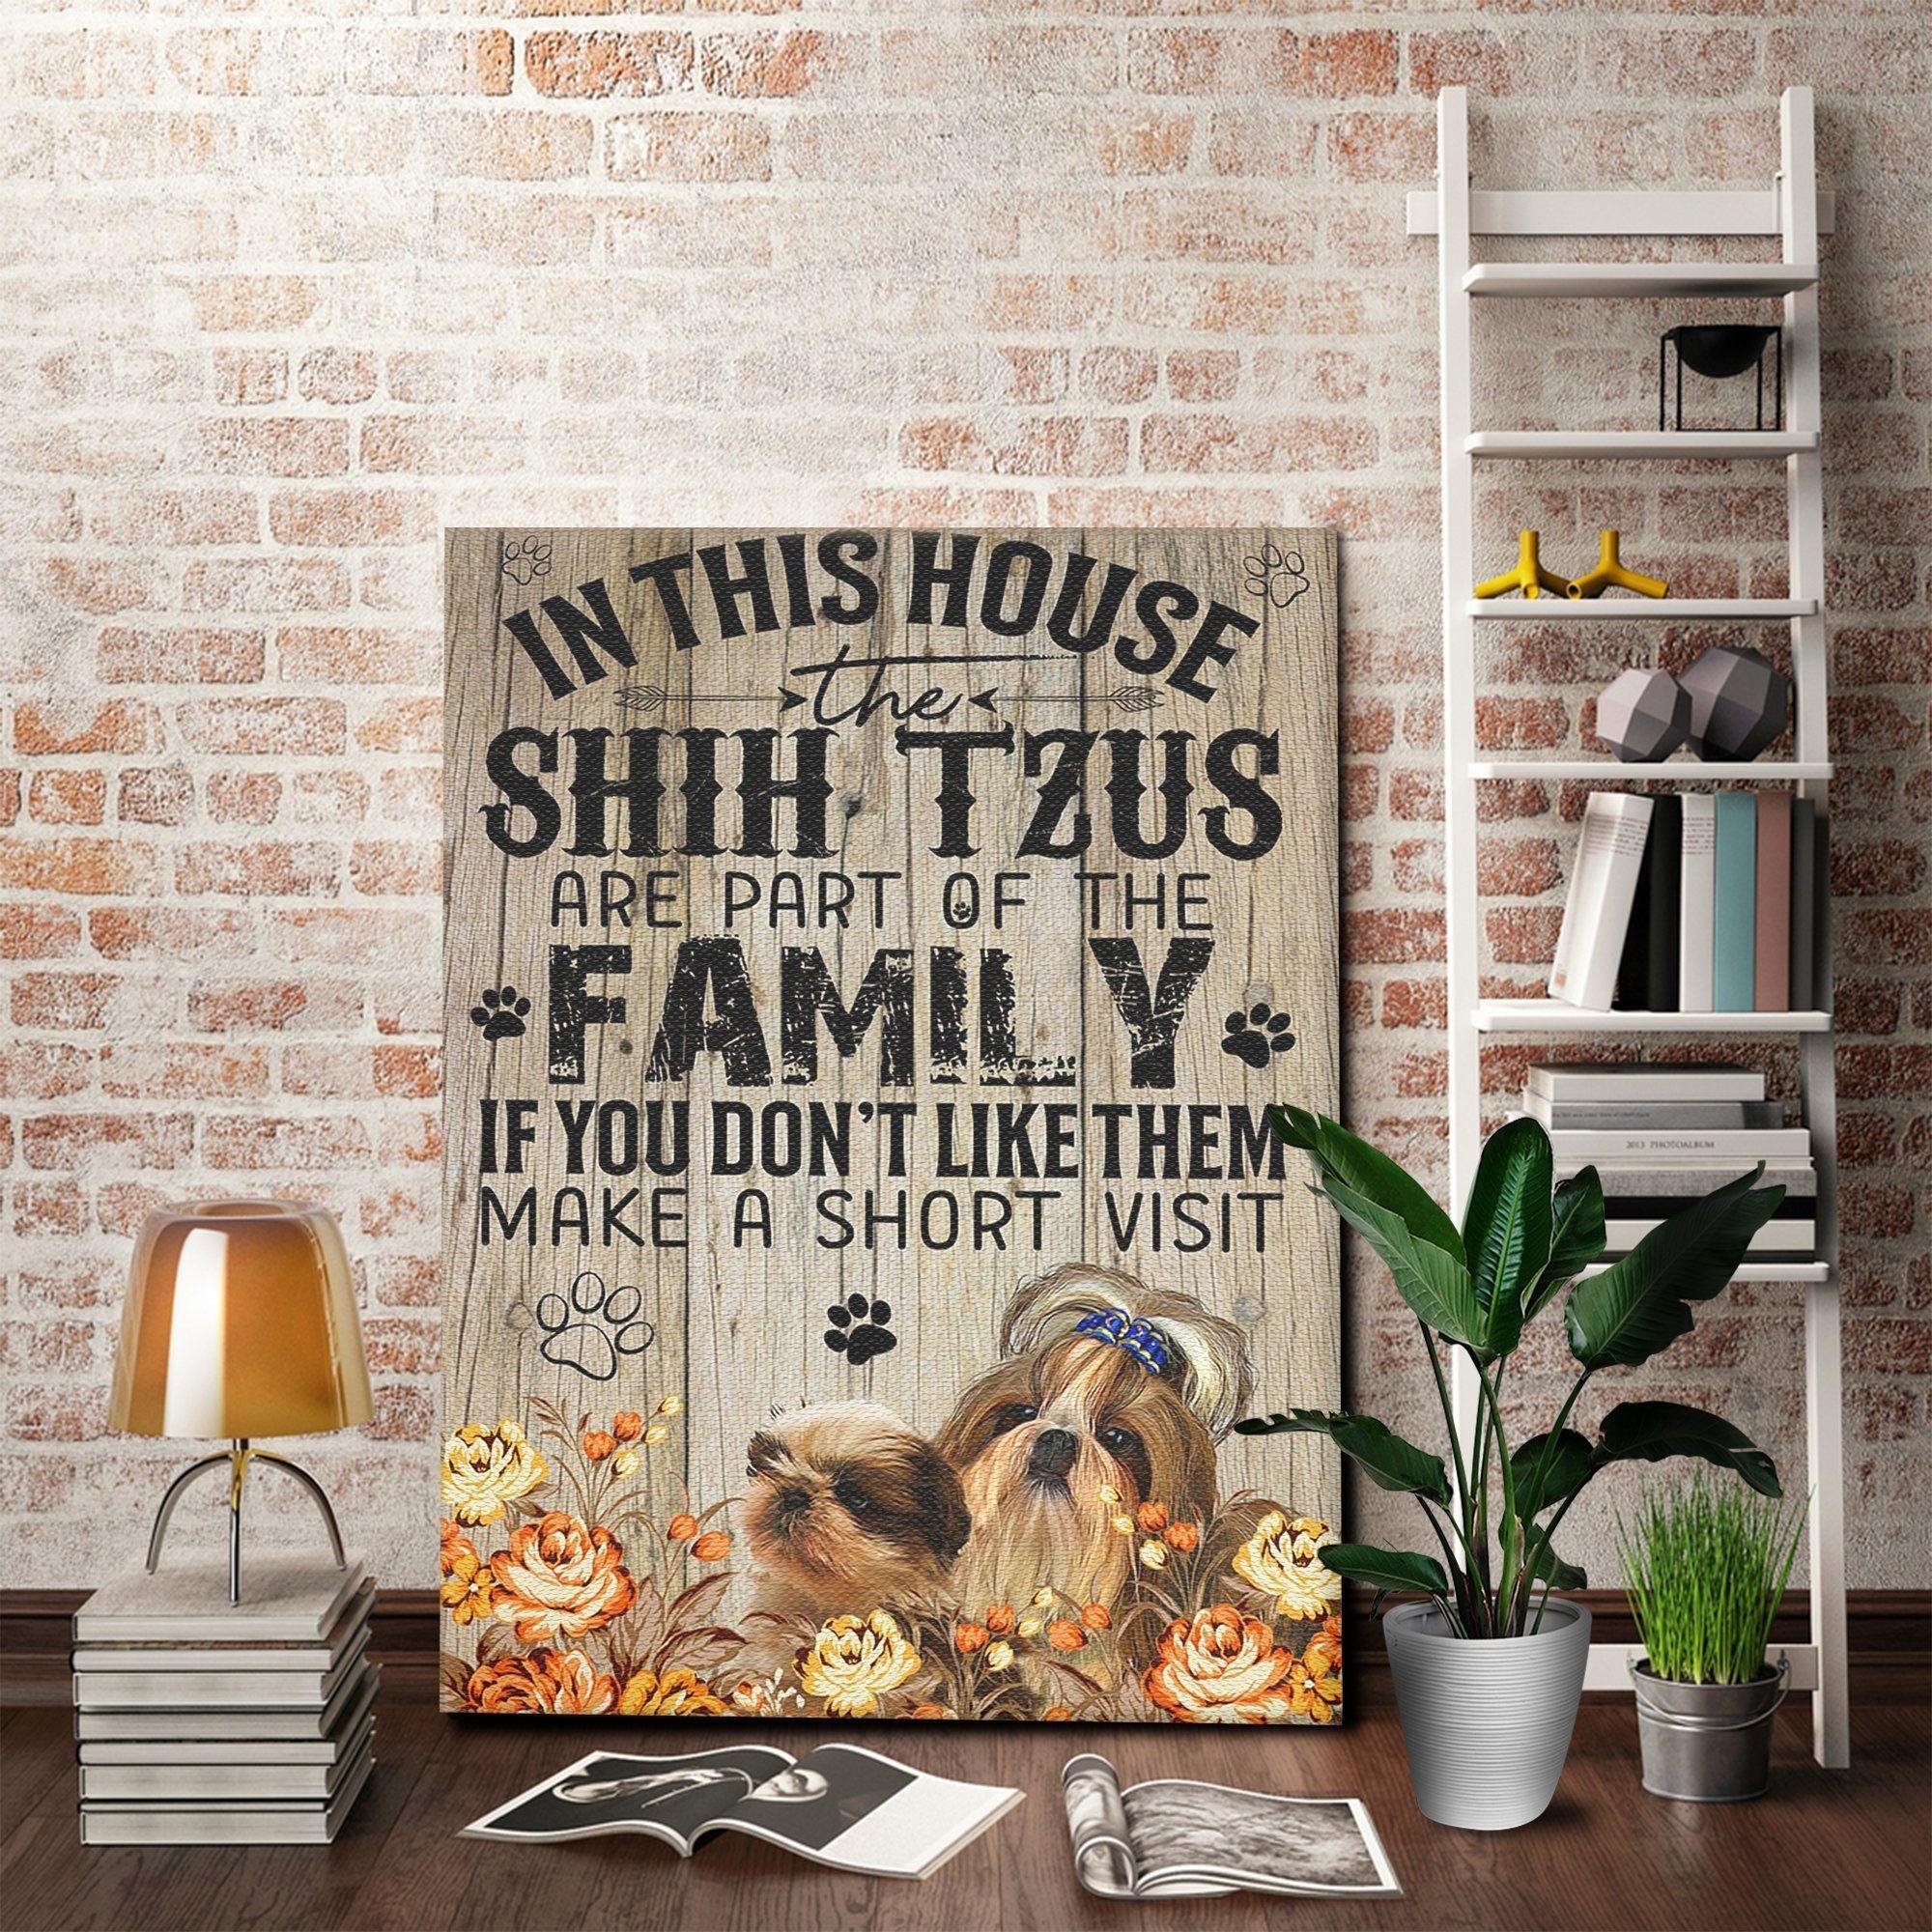 Shih Tzu Portrait Canvas - In This House The Shih Tzus Are Part Of The Family - Gift For Dog Lovers, Husband, Wife, Son, Daughter, Friends Portrait Canvas Prints - Amzanimalsgift